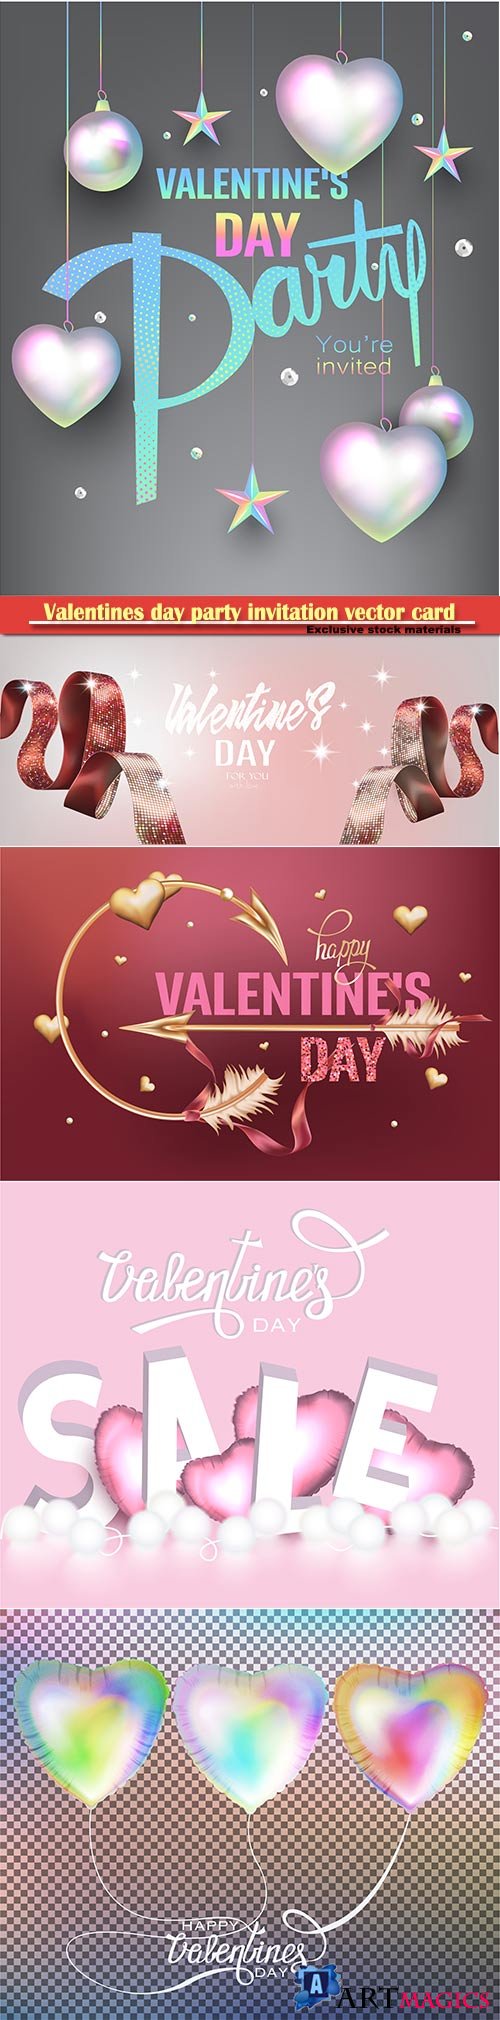 Valentines day party invitation vector card # 8